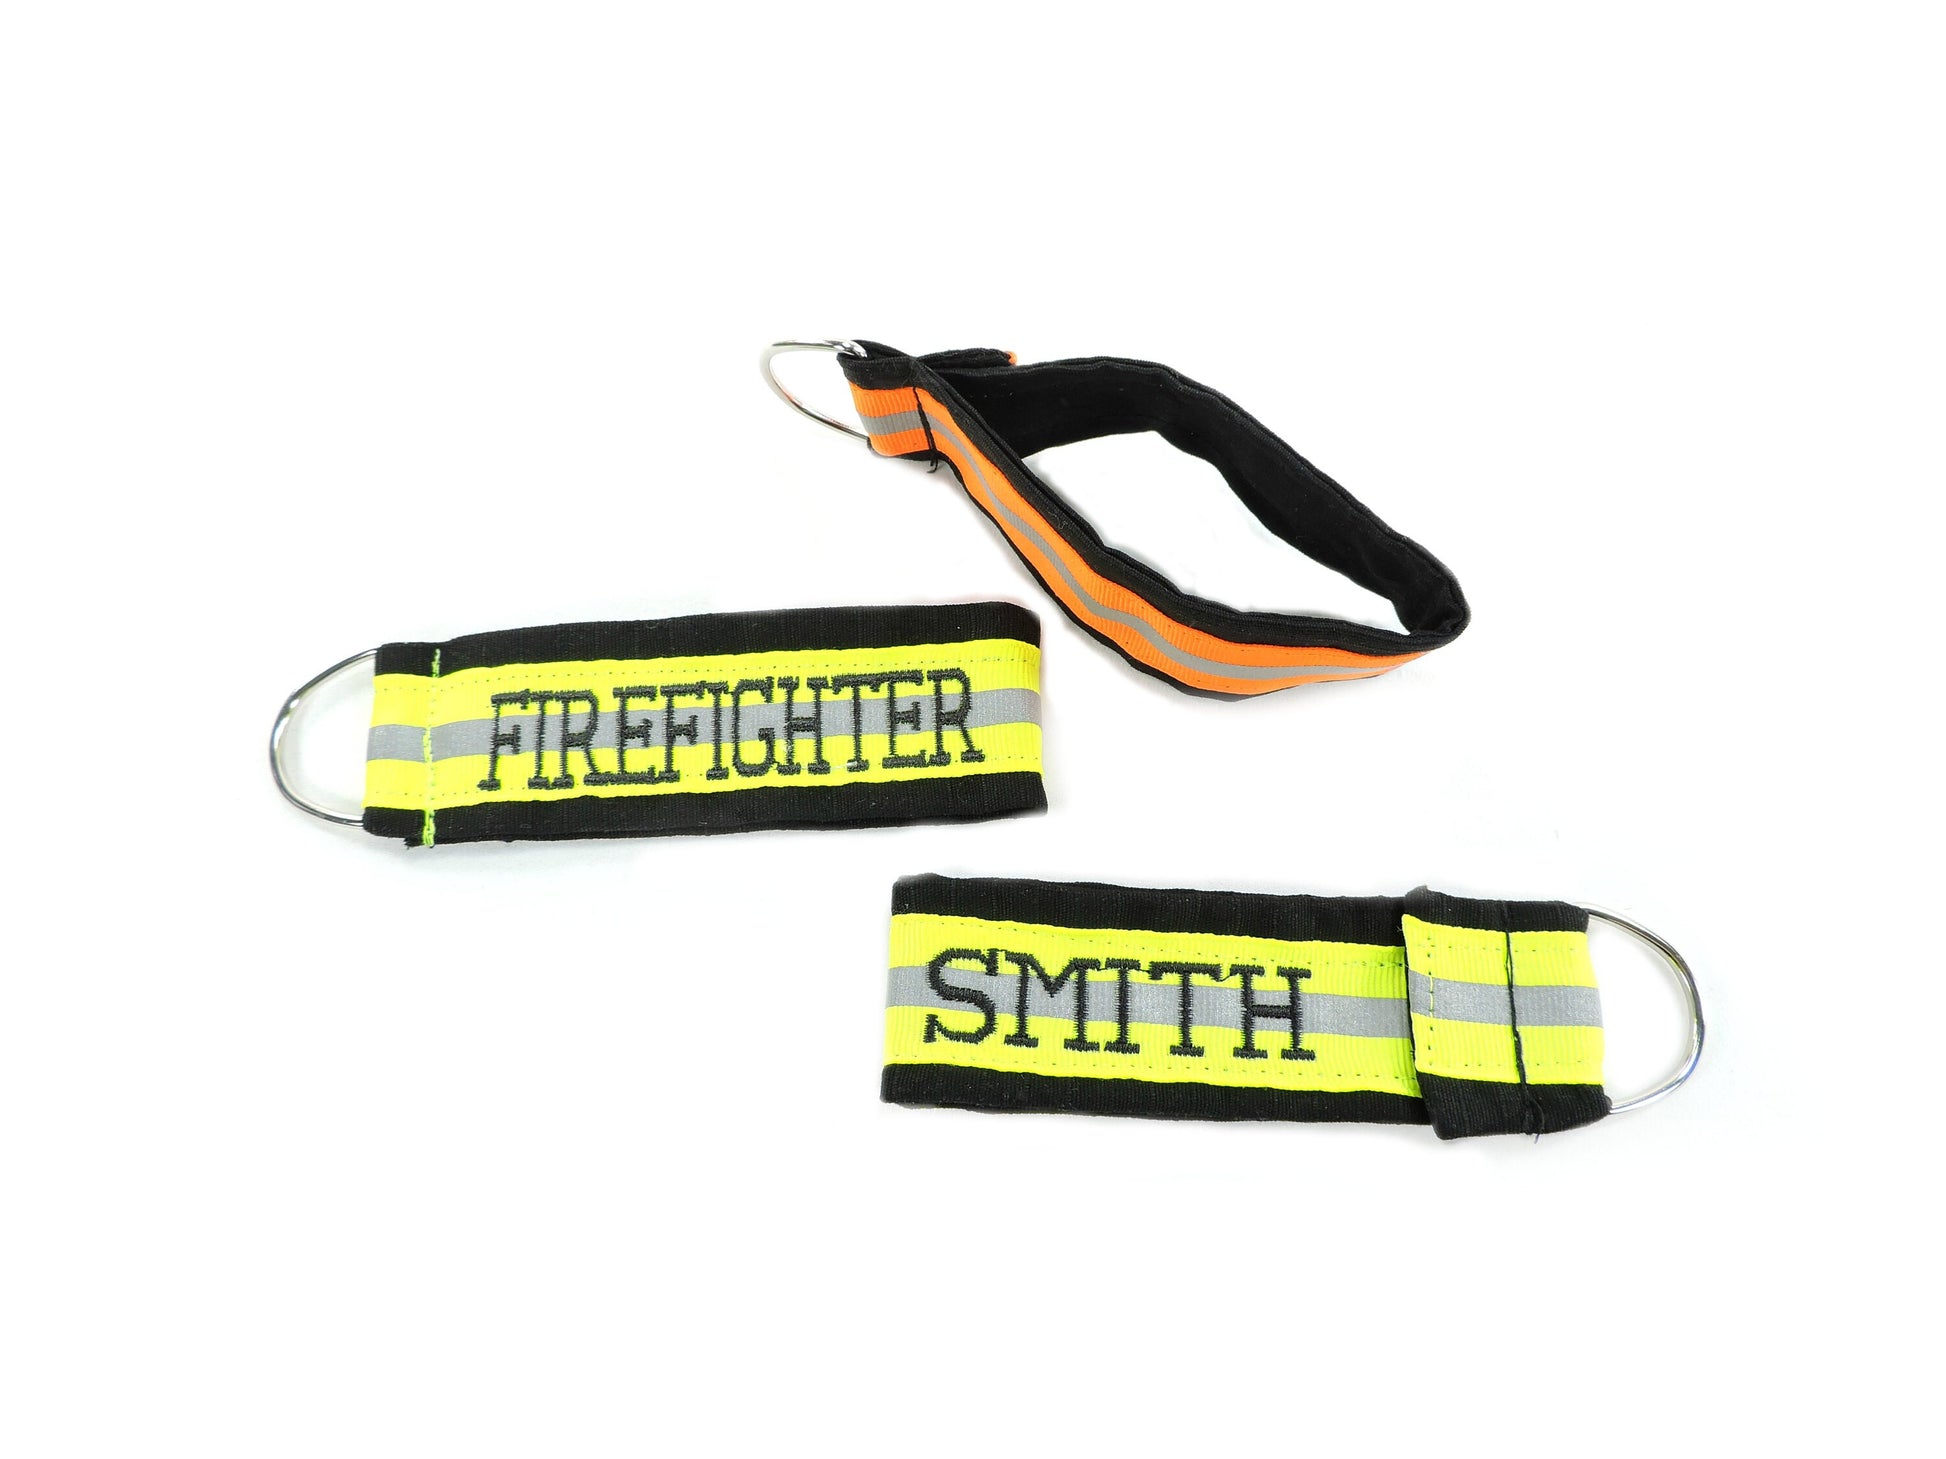 Showing the front back and side of the firefighter keychain